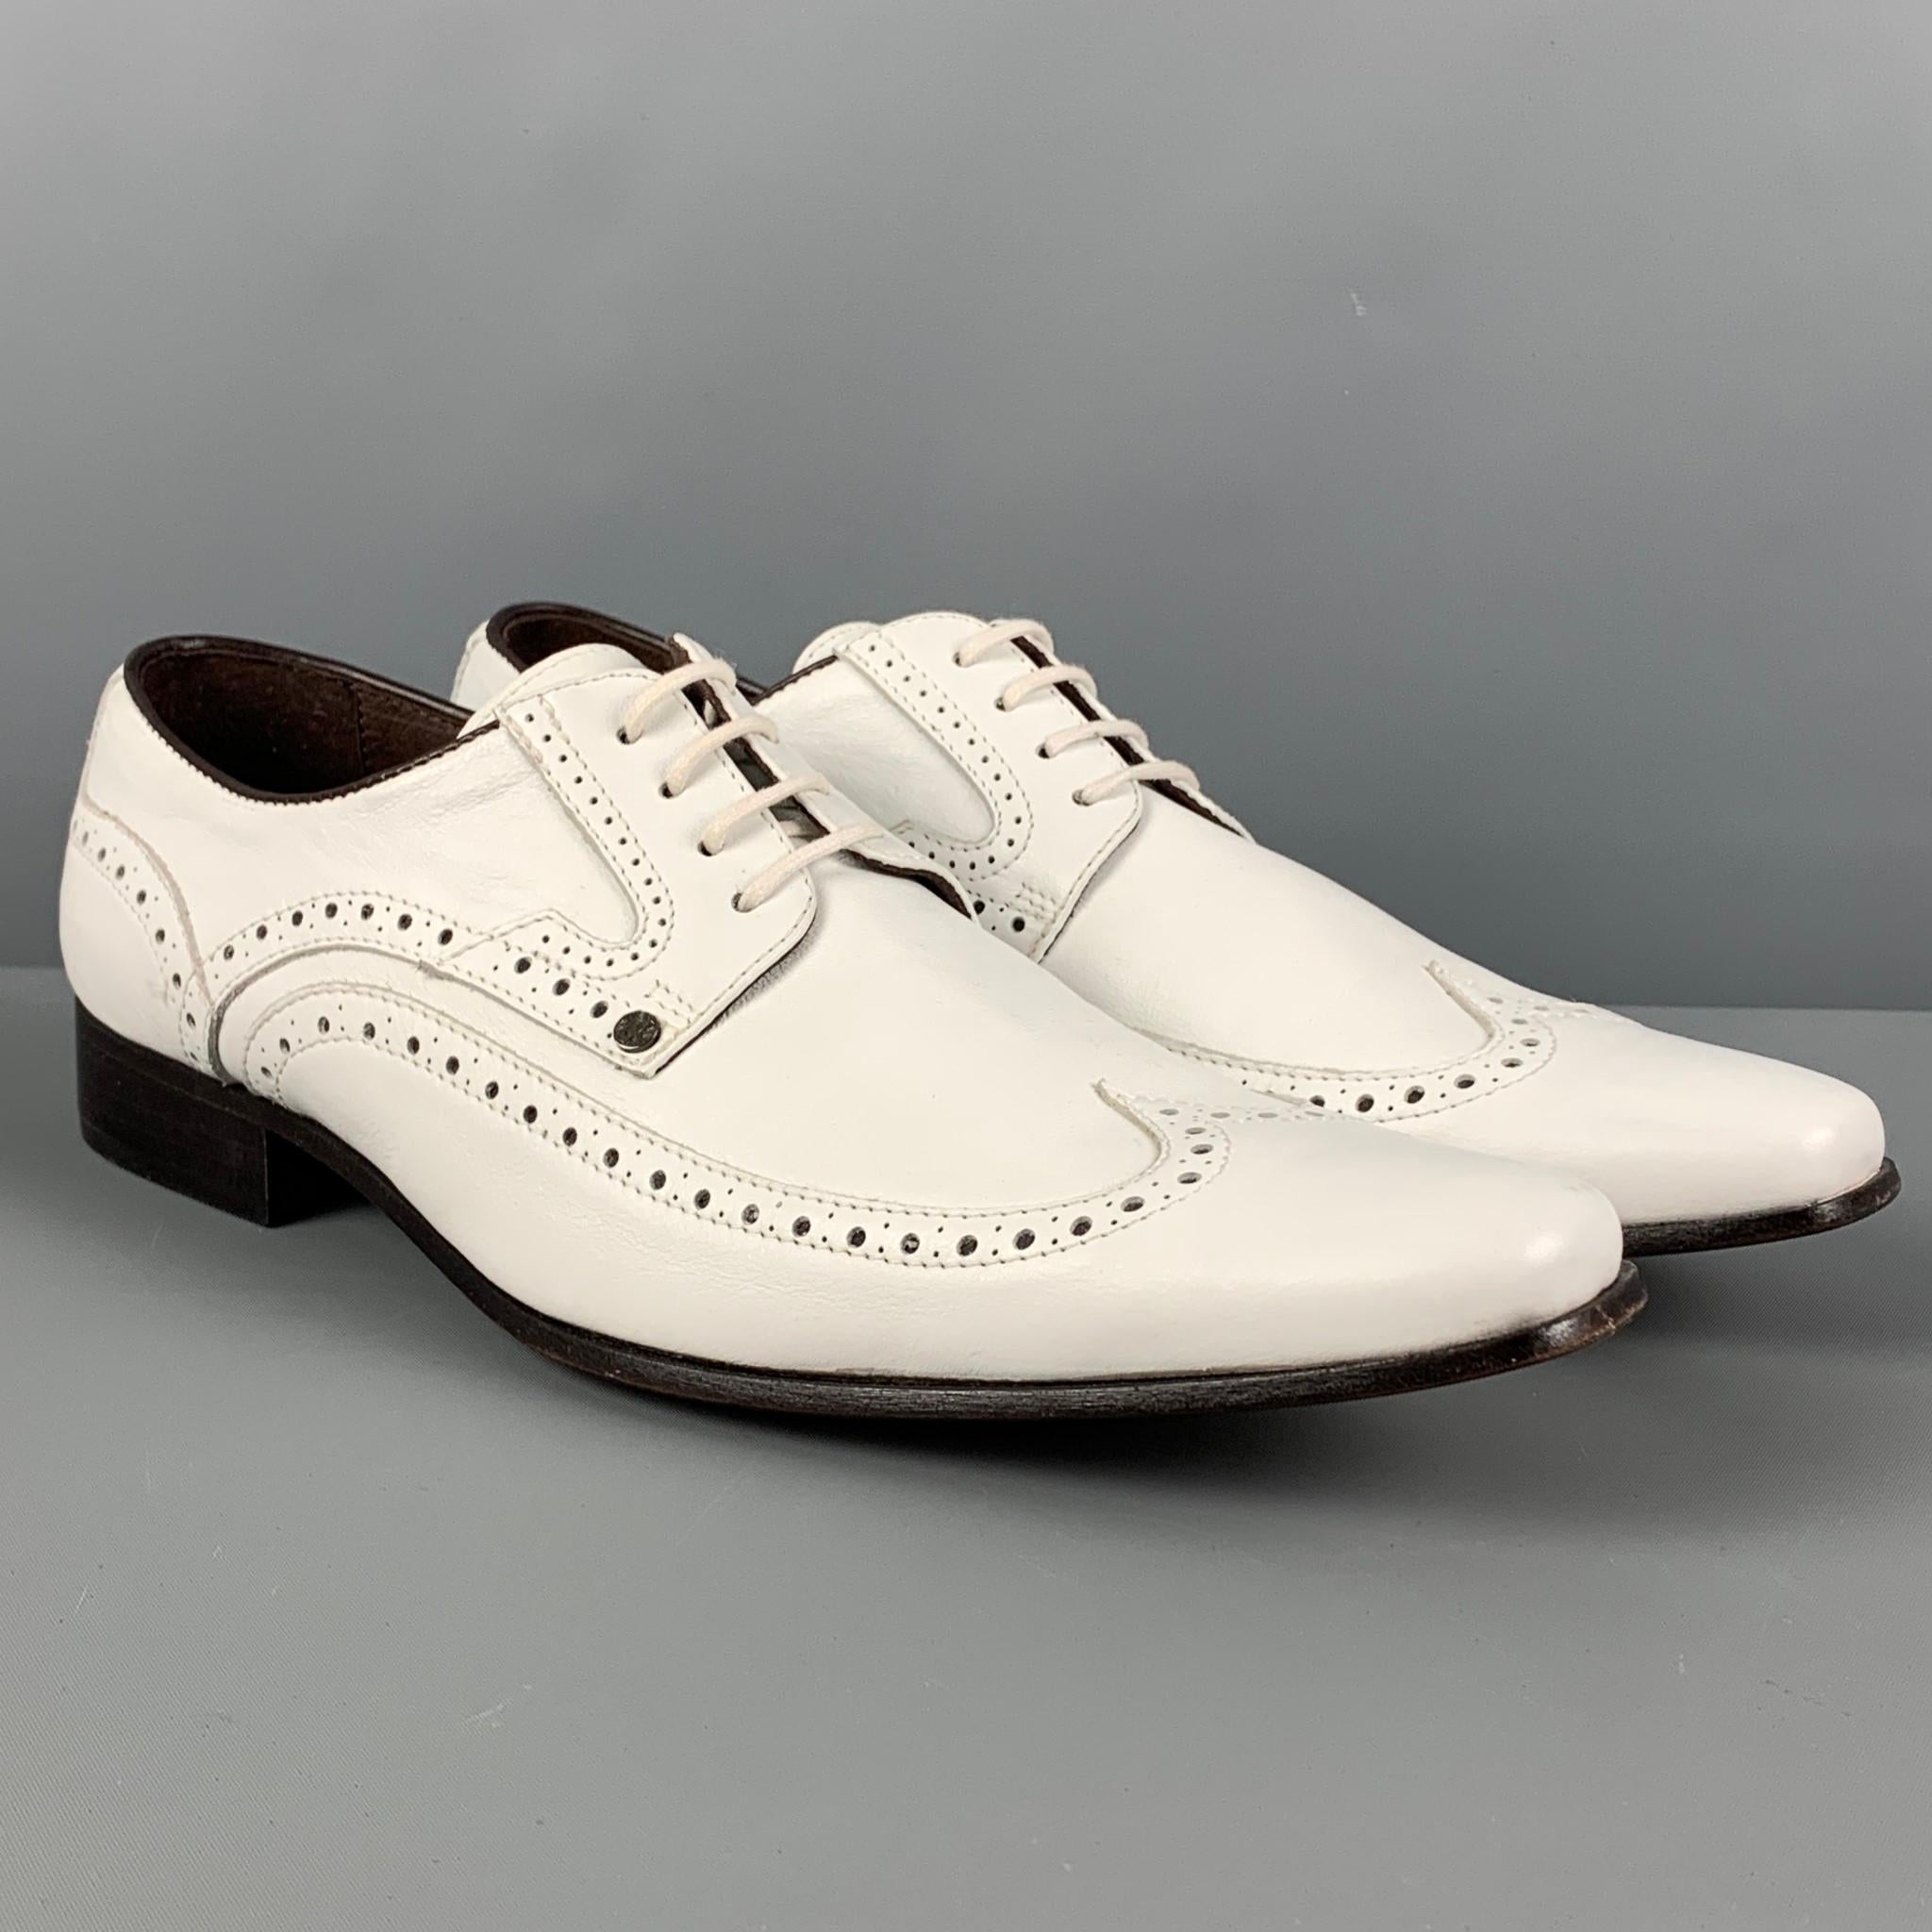 VERSACE shoes comes in a white perforated leather featuring a square toe, top stitching, and a lace up closure. Includes box. Made in Italy. 

Very Good Pre-Owned Condition. Light wear. As-is.
Marked: 42

Outsole: 12.25 in. x 4 in.